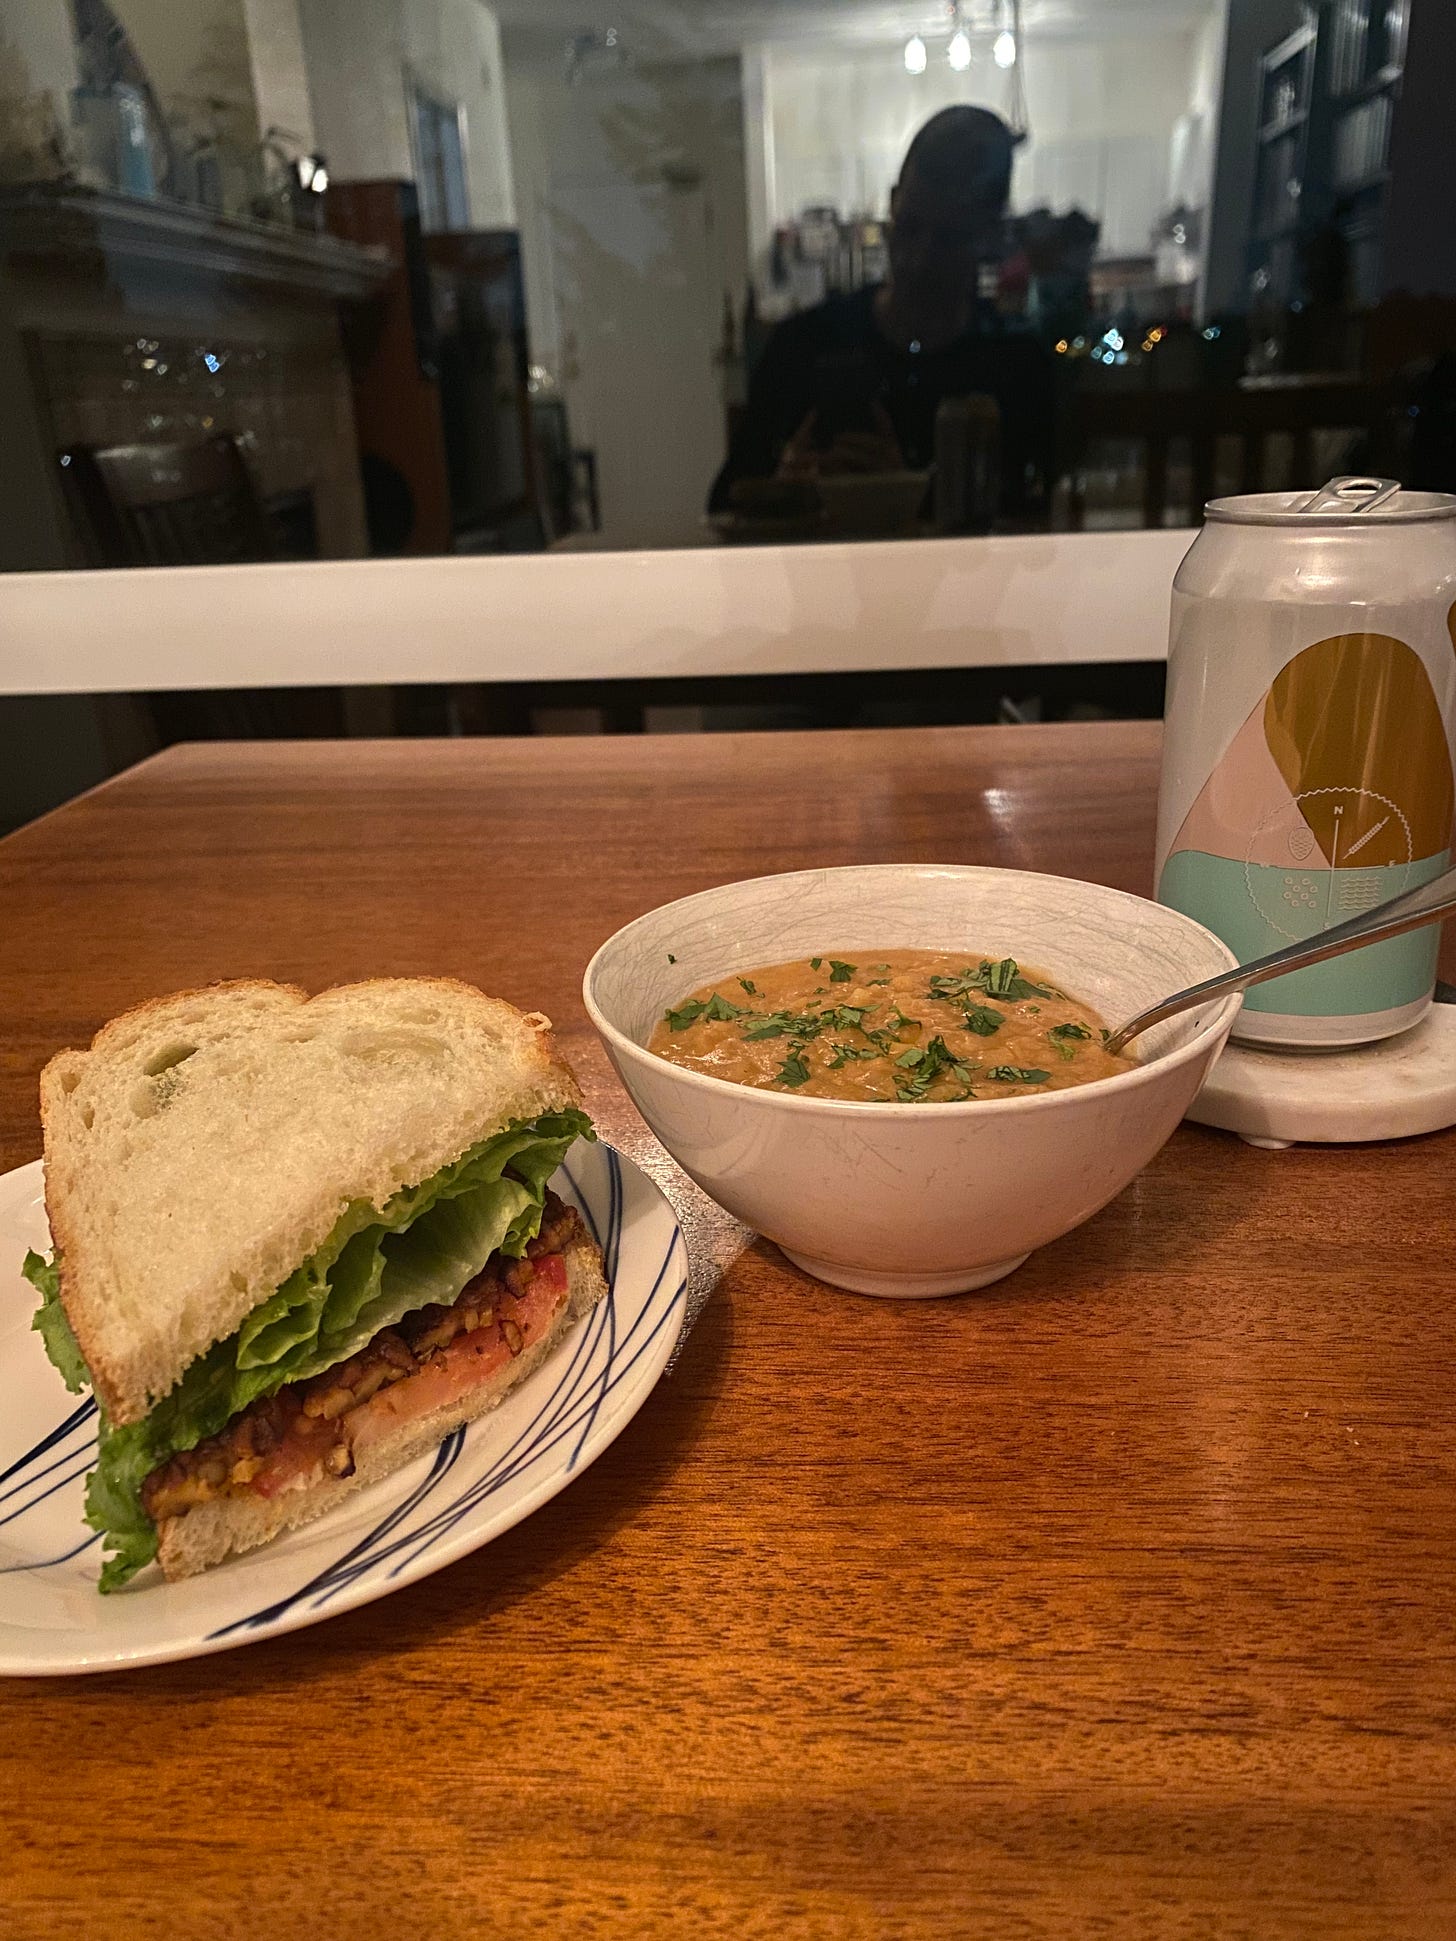 A side plate with half a tempeh BLT on it, next to a little white bowl of soup sprinkled with cilantro. A can of Four Winds lager is on a coaster on the right side of the bowl. The window is dark in the background.